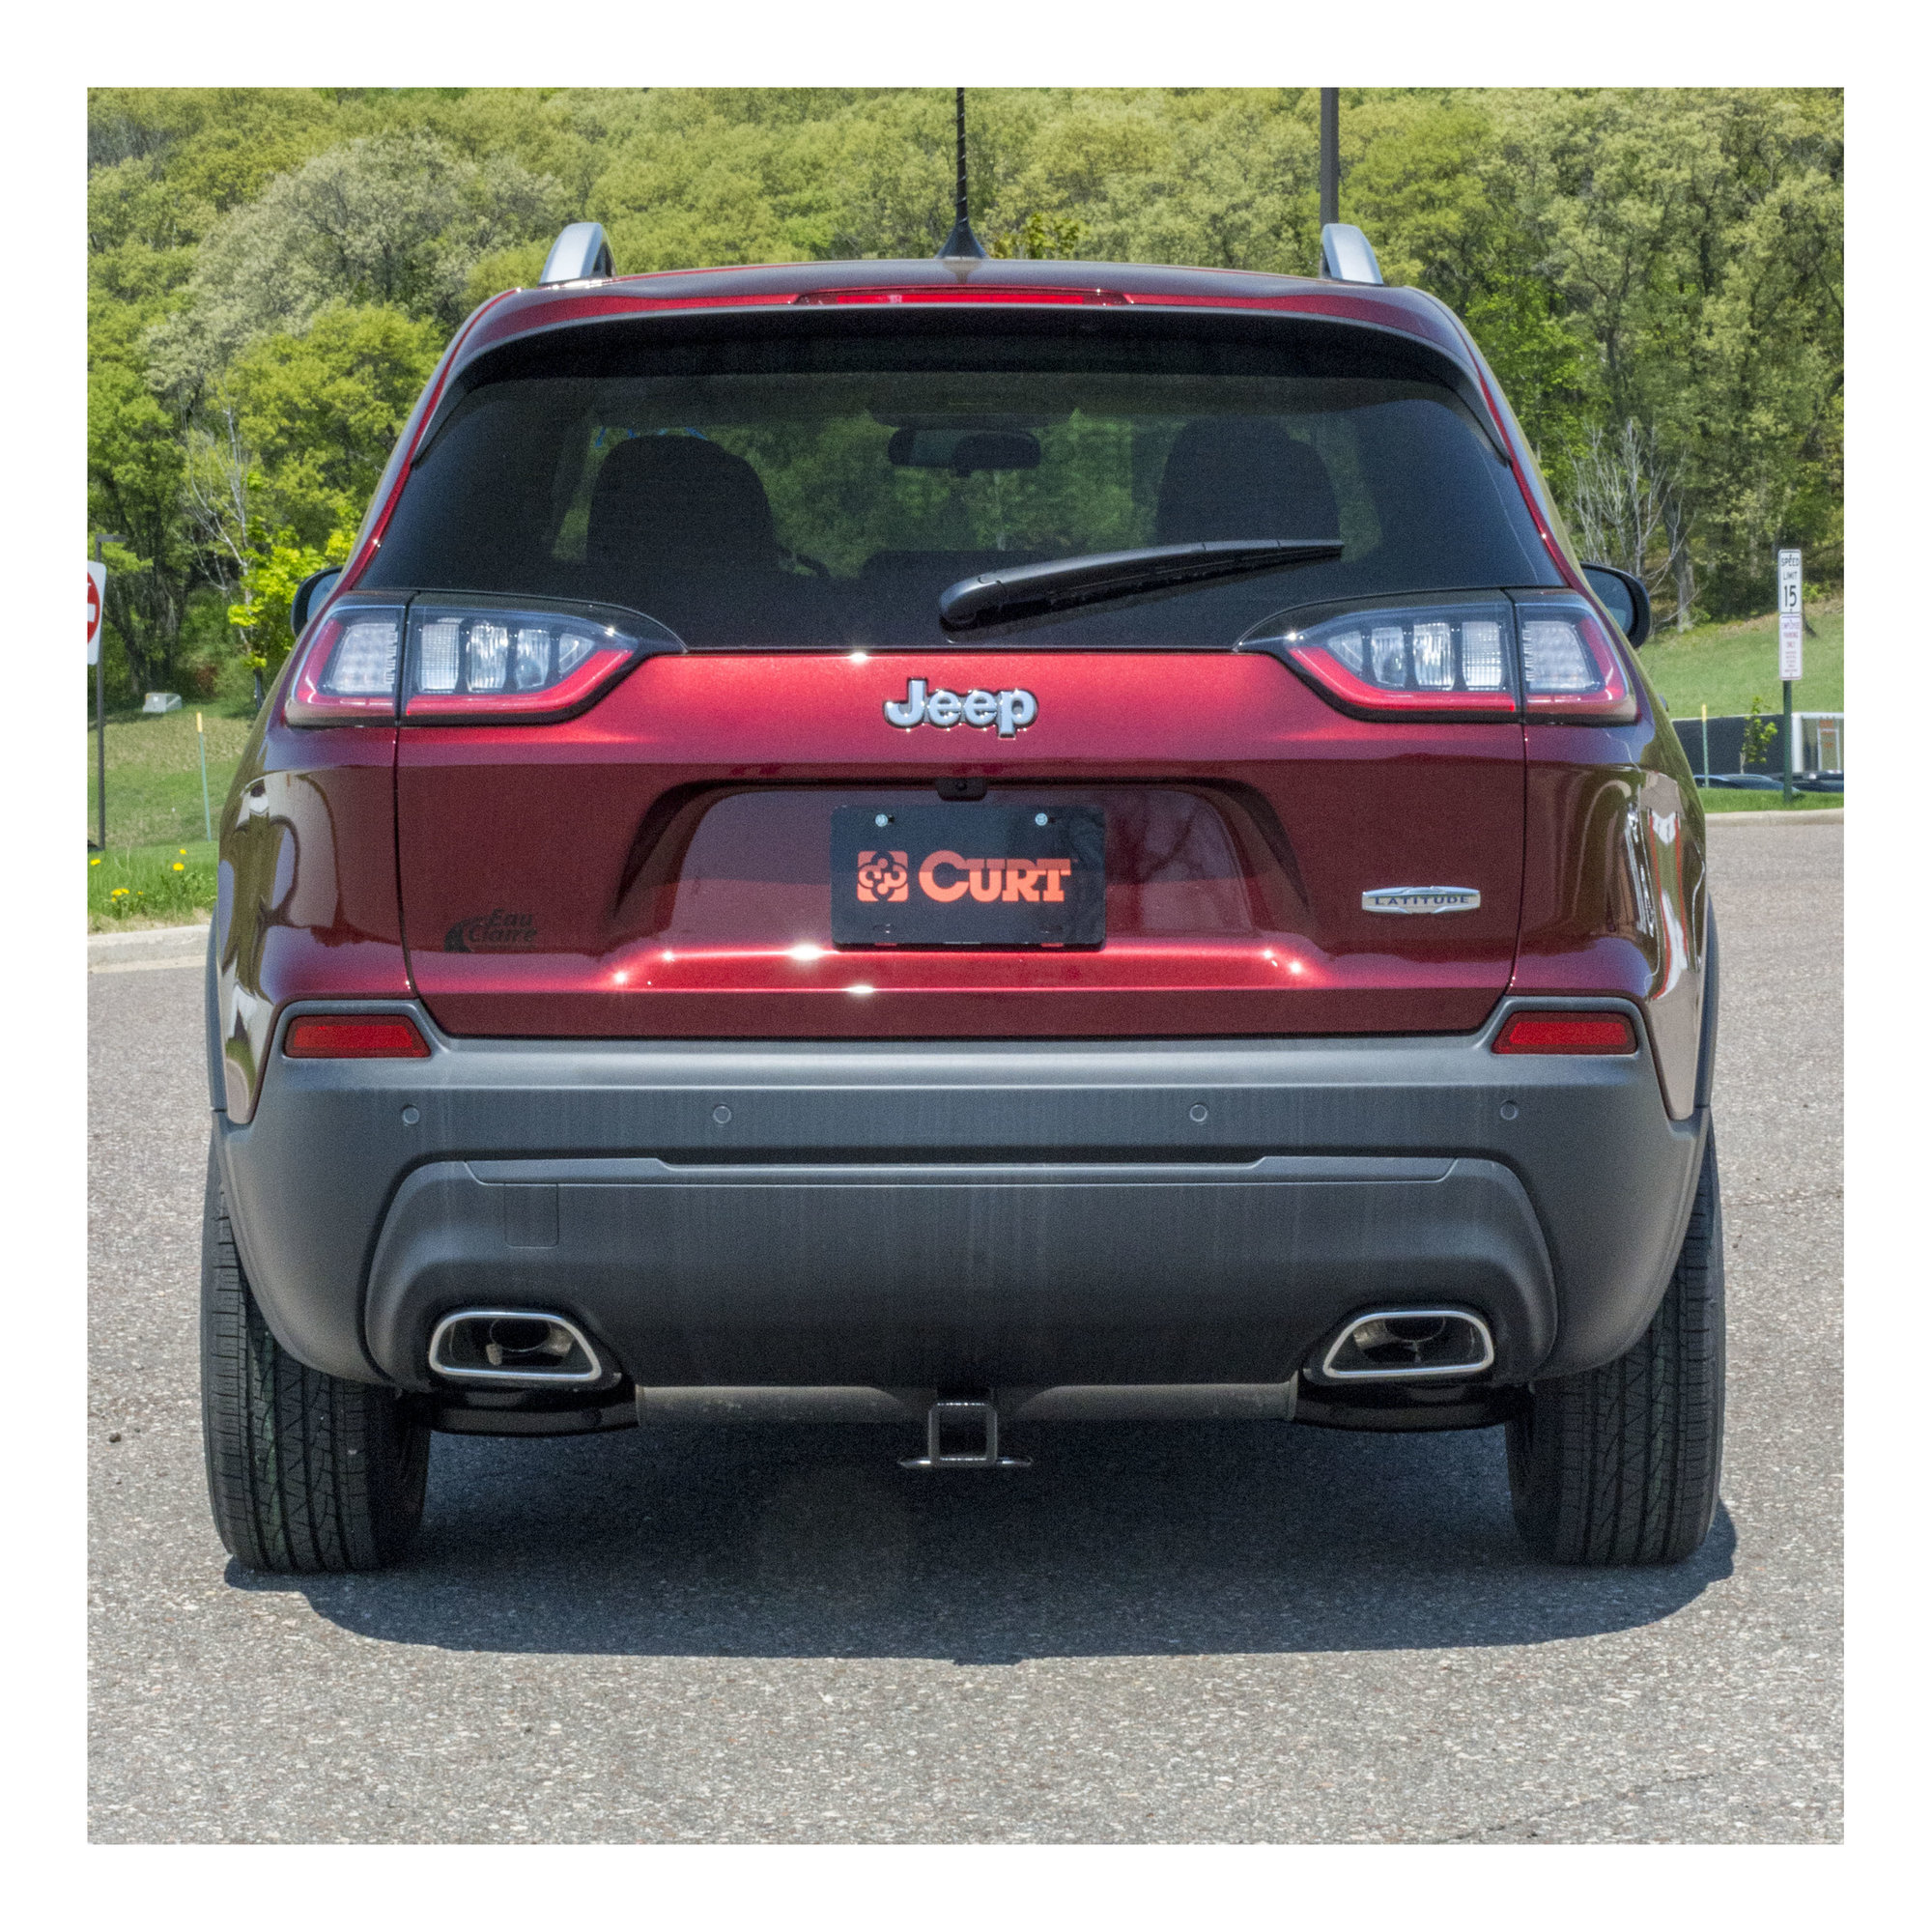 CURT Class III Trailer Hitch with 2" Receiver for 2019 Jeep Cherokee KL | Quadratec 2019 Jeep Cherokee Latitude Plus Trailer Hitch